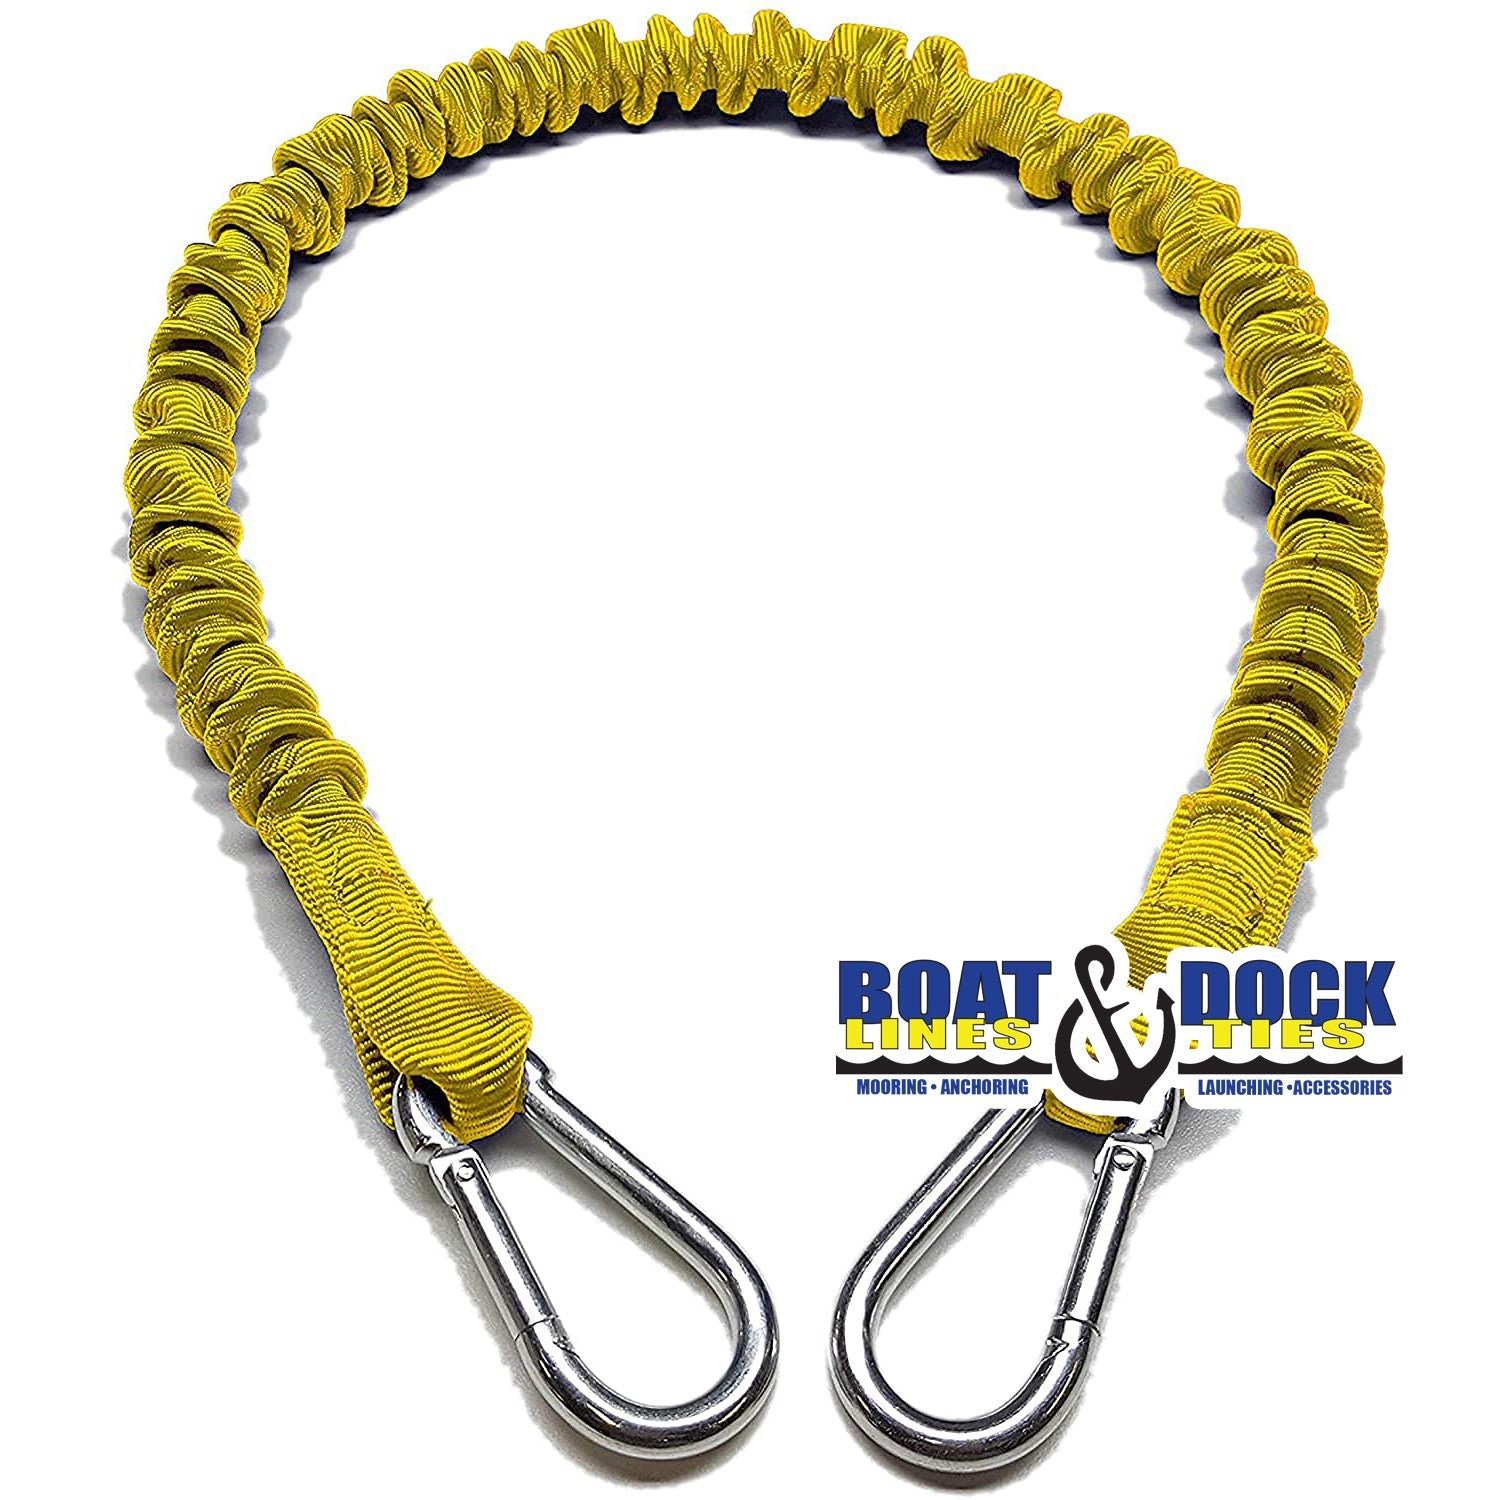 Boat Dock Tie Bungee Cords,  2 Hooked Ends, UV Protected Bungee Cords - Set of 2 - Made in USA